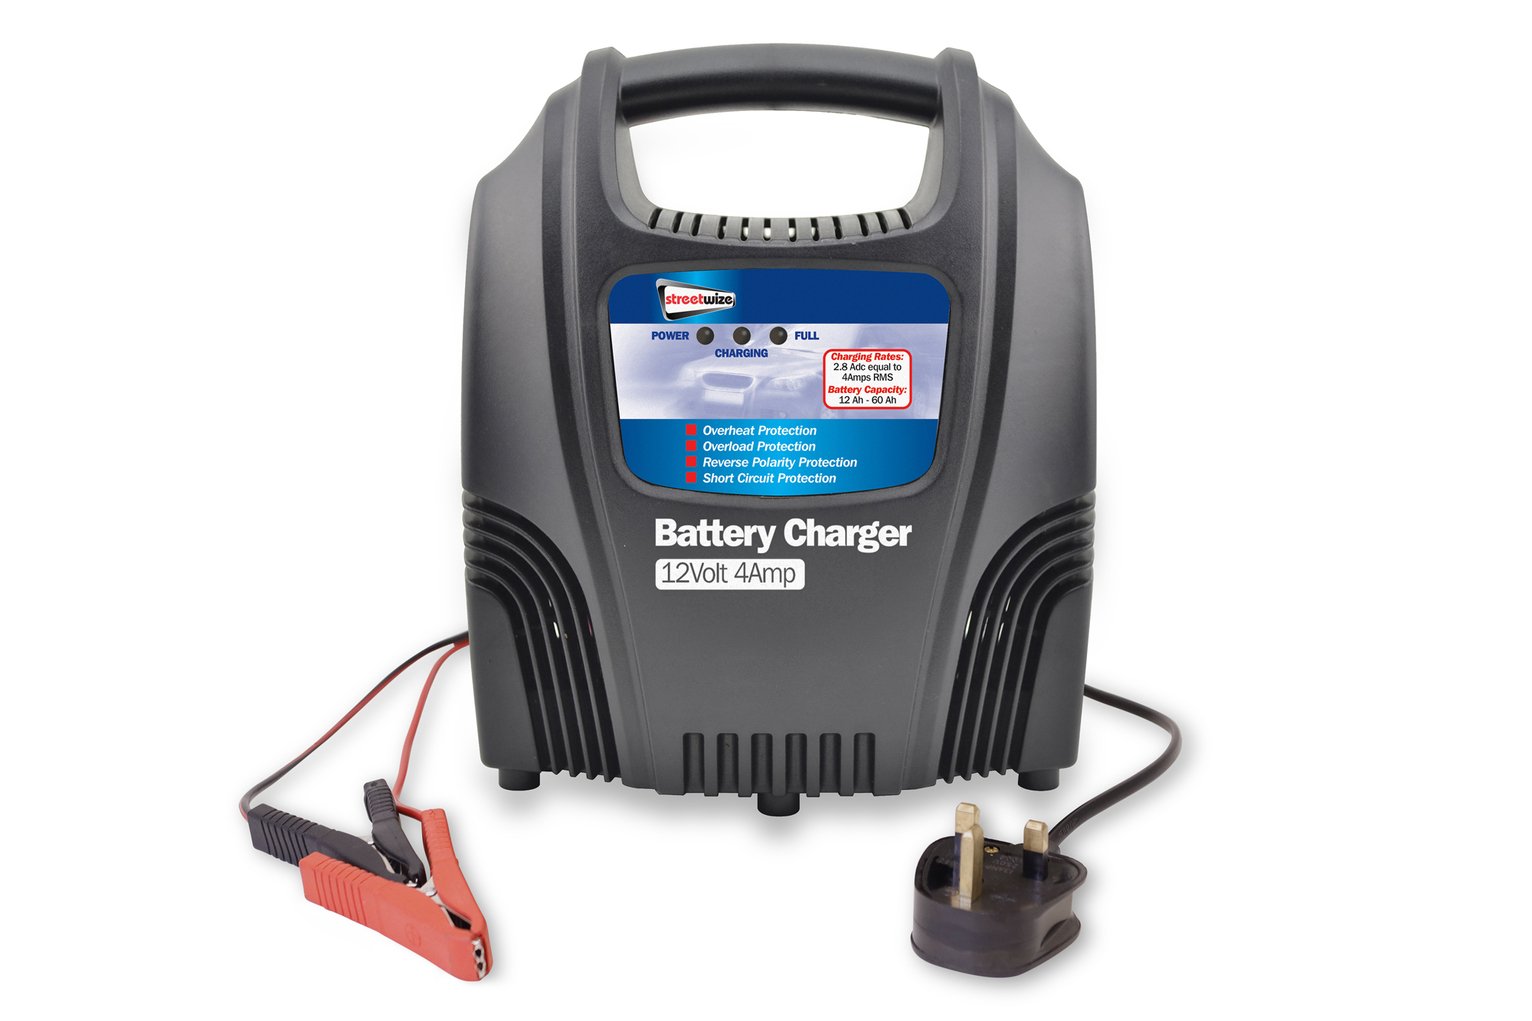 Streetwize 4amp 12V Compact Battery Charger.